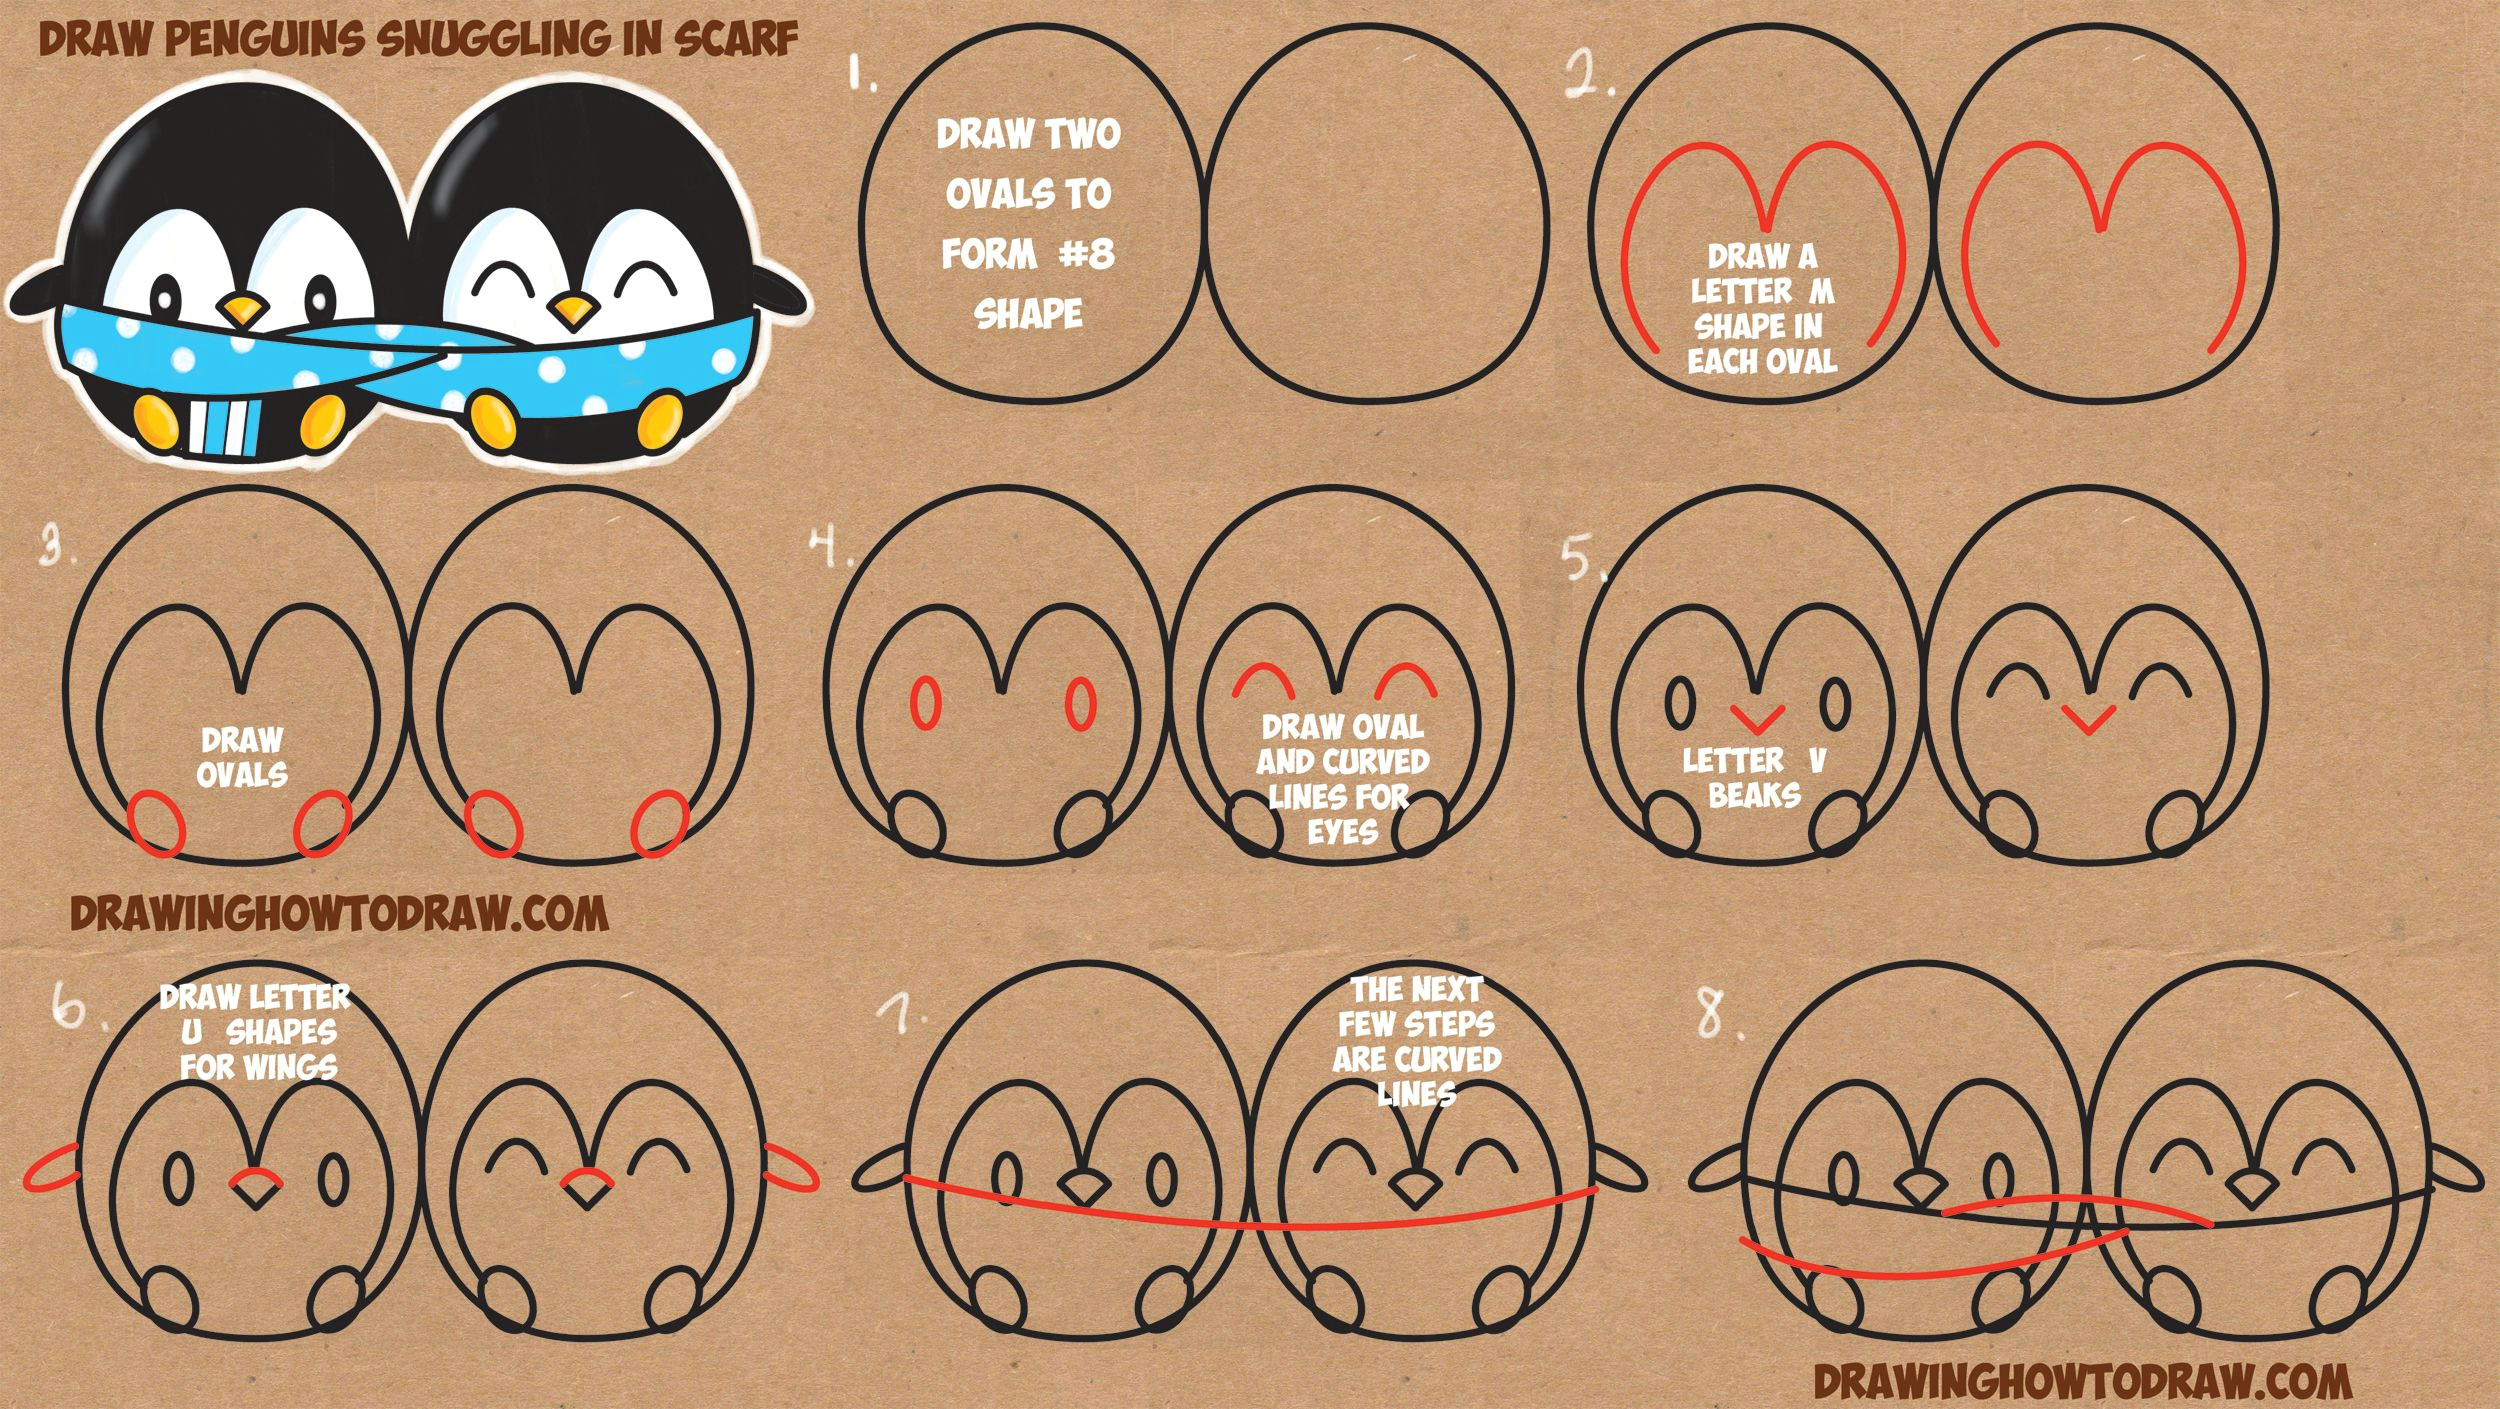 Easy Drawings Penguin How to Draw Cute Kawaii Chibi Cartoon Penguins In A Scarf for